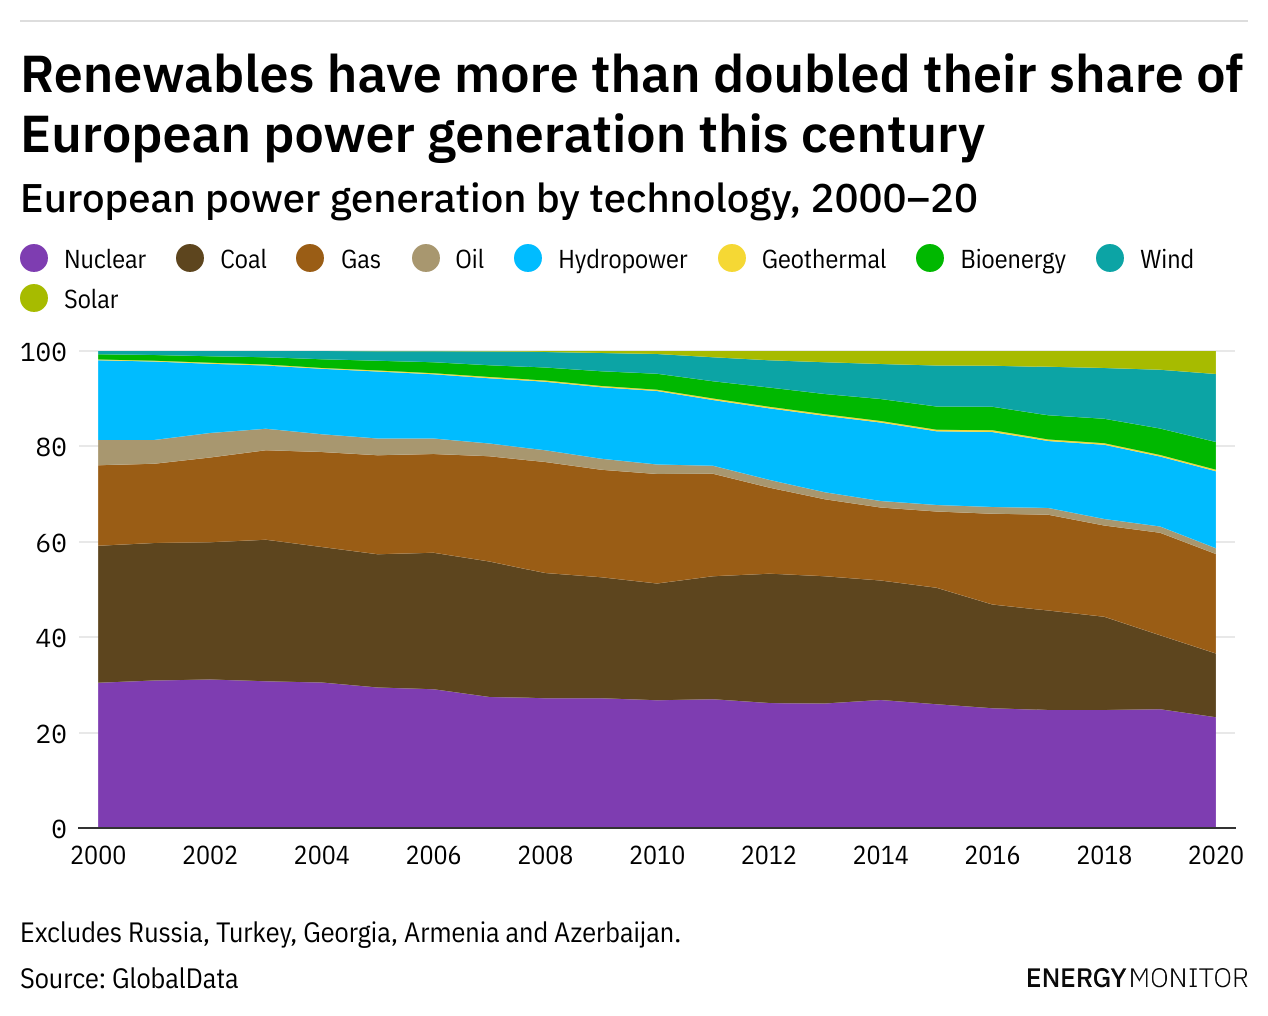 Line graph showing renewable energy sources have more than doubled their share of European power generation in this century.